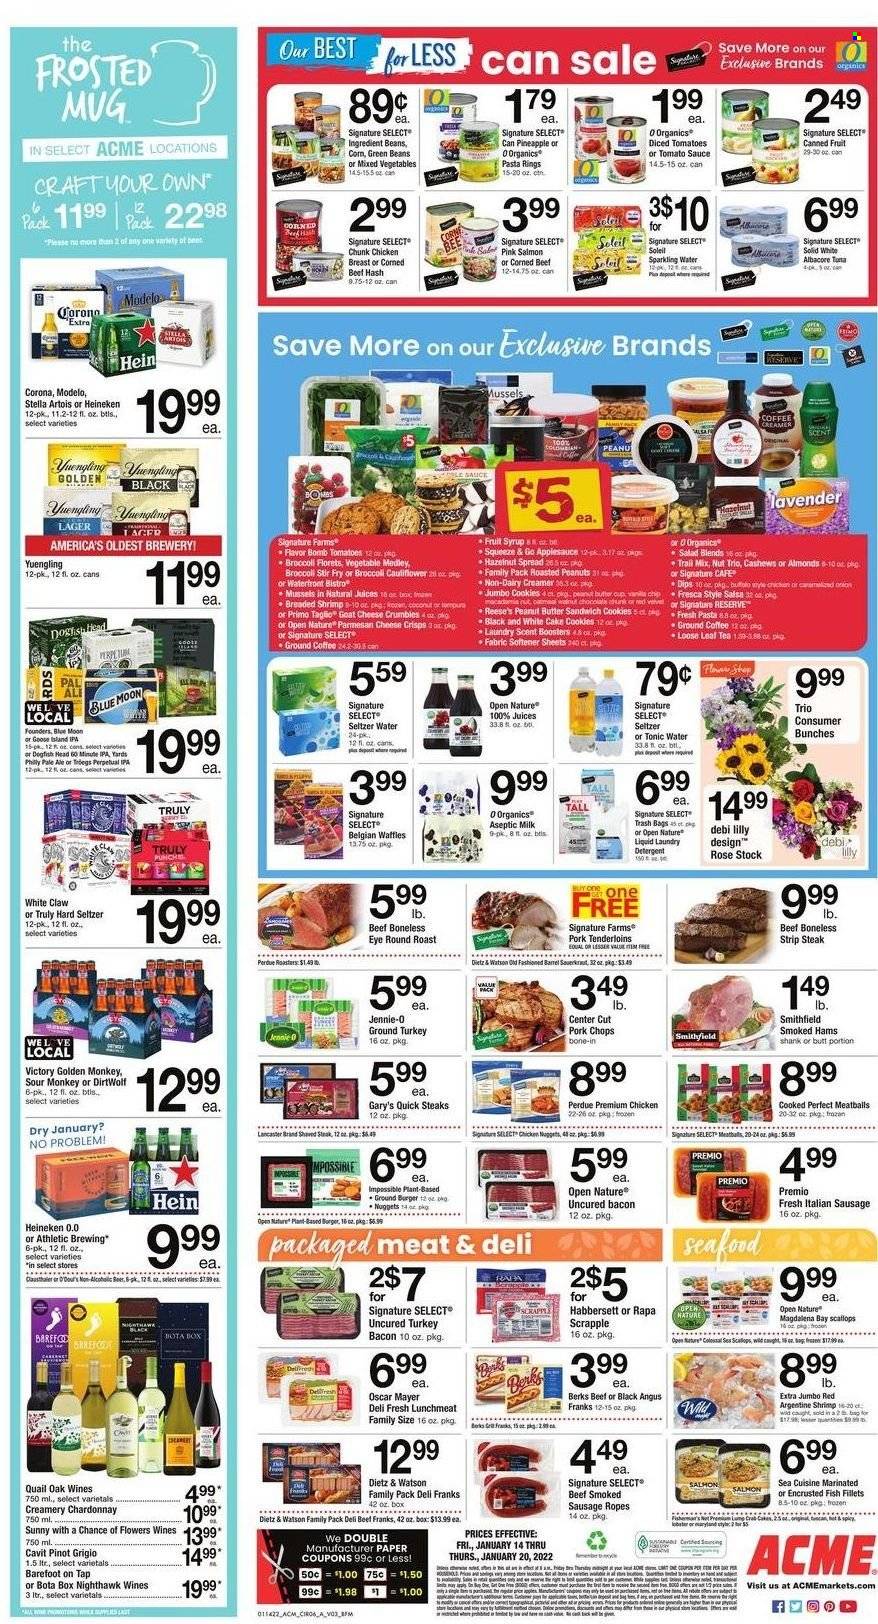 thumbnail - ACME Flyer - 01/14/2022 - 01/20/2022 - Sales products - broccoli, cauliflower, corn, green beans, tomatoes, onion, salad, coconut, fish fillets, mussels, salmon, scallops, tuna, fish, shrimps, crab cake, meatballs, hamburger, sauce, Perdue®, bacon, turkey bacon, Oscar Mayer, Dietz & Watson, smoked sausage, italian sausage, lunch meat, corned beef, goat cheese, parmesan, cheese, cheese crumbles, milk, non dairy creamer, creamer, Reese's, mixed vegetables, cookies, sandwich cookies, chocolate, oatmeal, tomato sauce, canned fruit, salsa, apple sauce, peanut butter, hazelnut spread, almonds, cashews, macadamia nuts, roasted peanuts, peanuts, trail mix, juice, tonic, sparkling water, tea, ground coffee, white wine, Chardonnay, Pinot Grigio, Quail Oak, rosé wine, White Claw, Hard Seltzer, TRULY, beer, Corona Extra, Heineken, Lager, Victory Golden, IPA, Modelo, ground turkey, beef meat, steak, round roast, striploin steak, pork chops, pork meat, pork tenderloin, detergent, fabric softener, laundry detergent, scent booster, trash bags, mug, paper, monkey, Stella Artois, Blue Moon, Yuengling. Page 6.